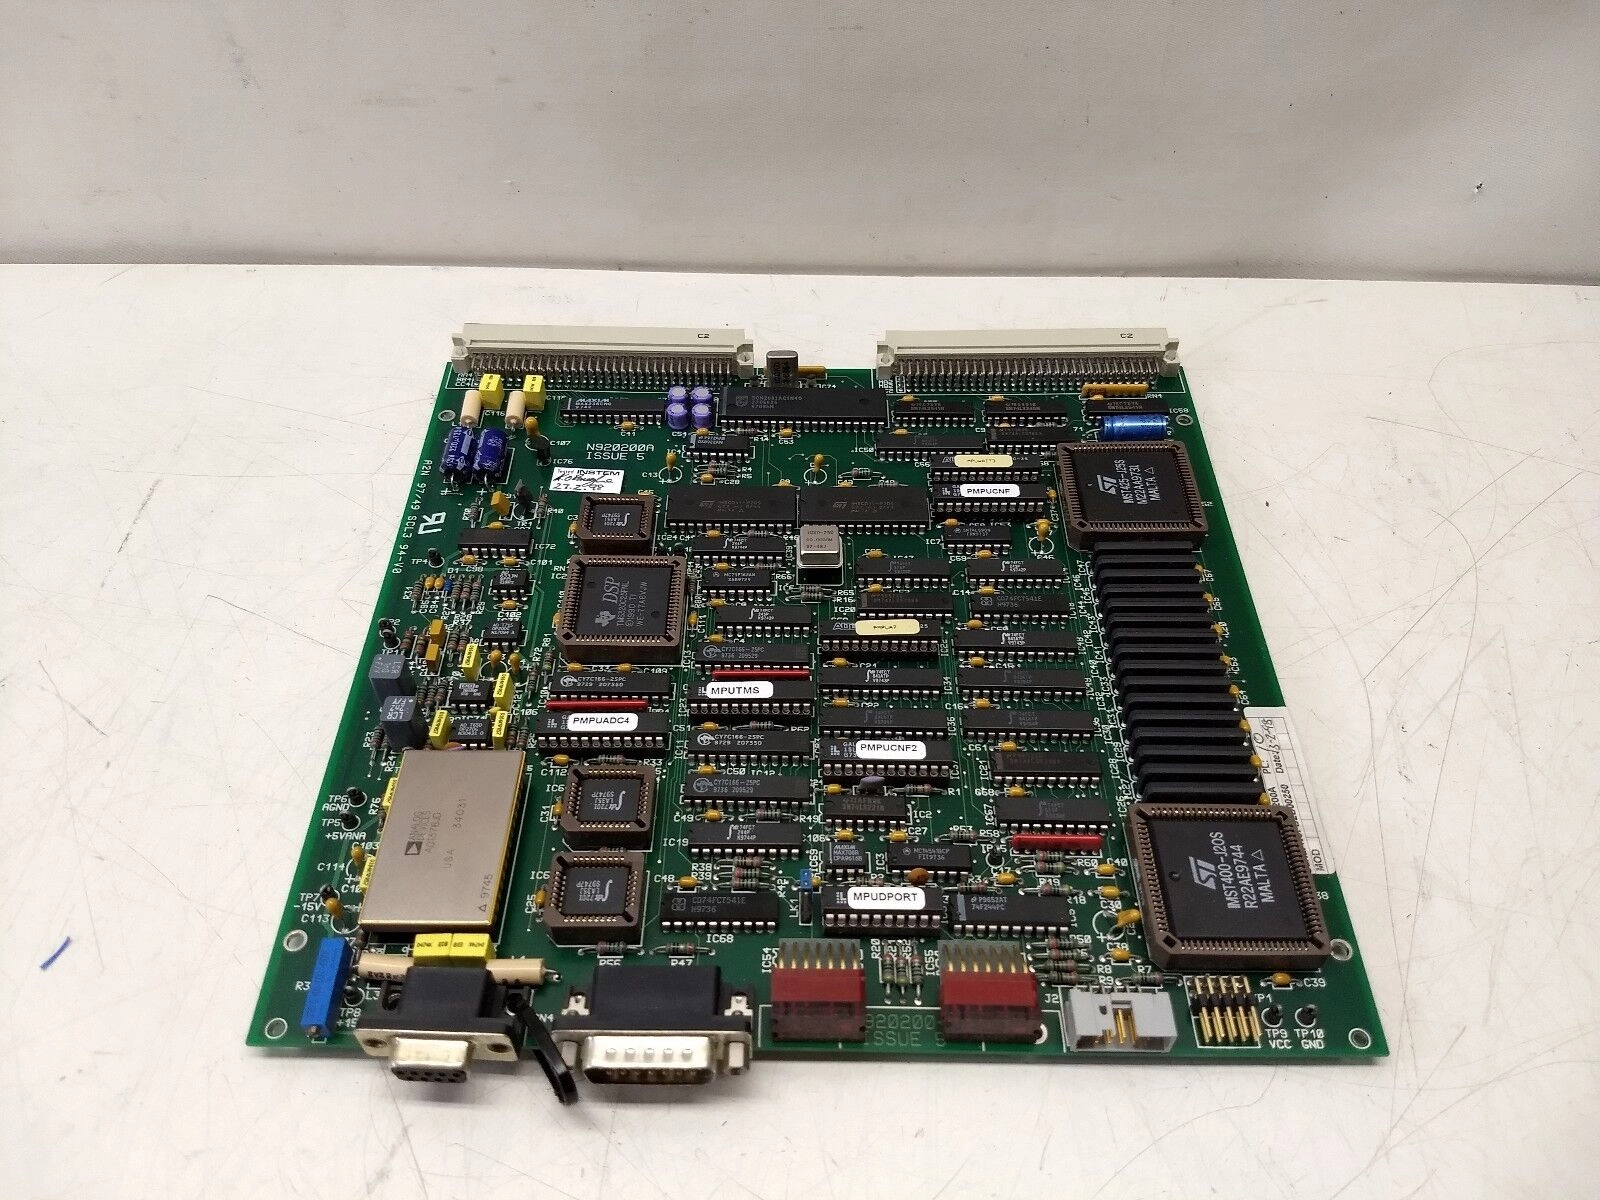 Waters Micromass Mass Spectrometer PCB N920200A